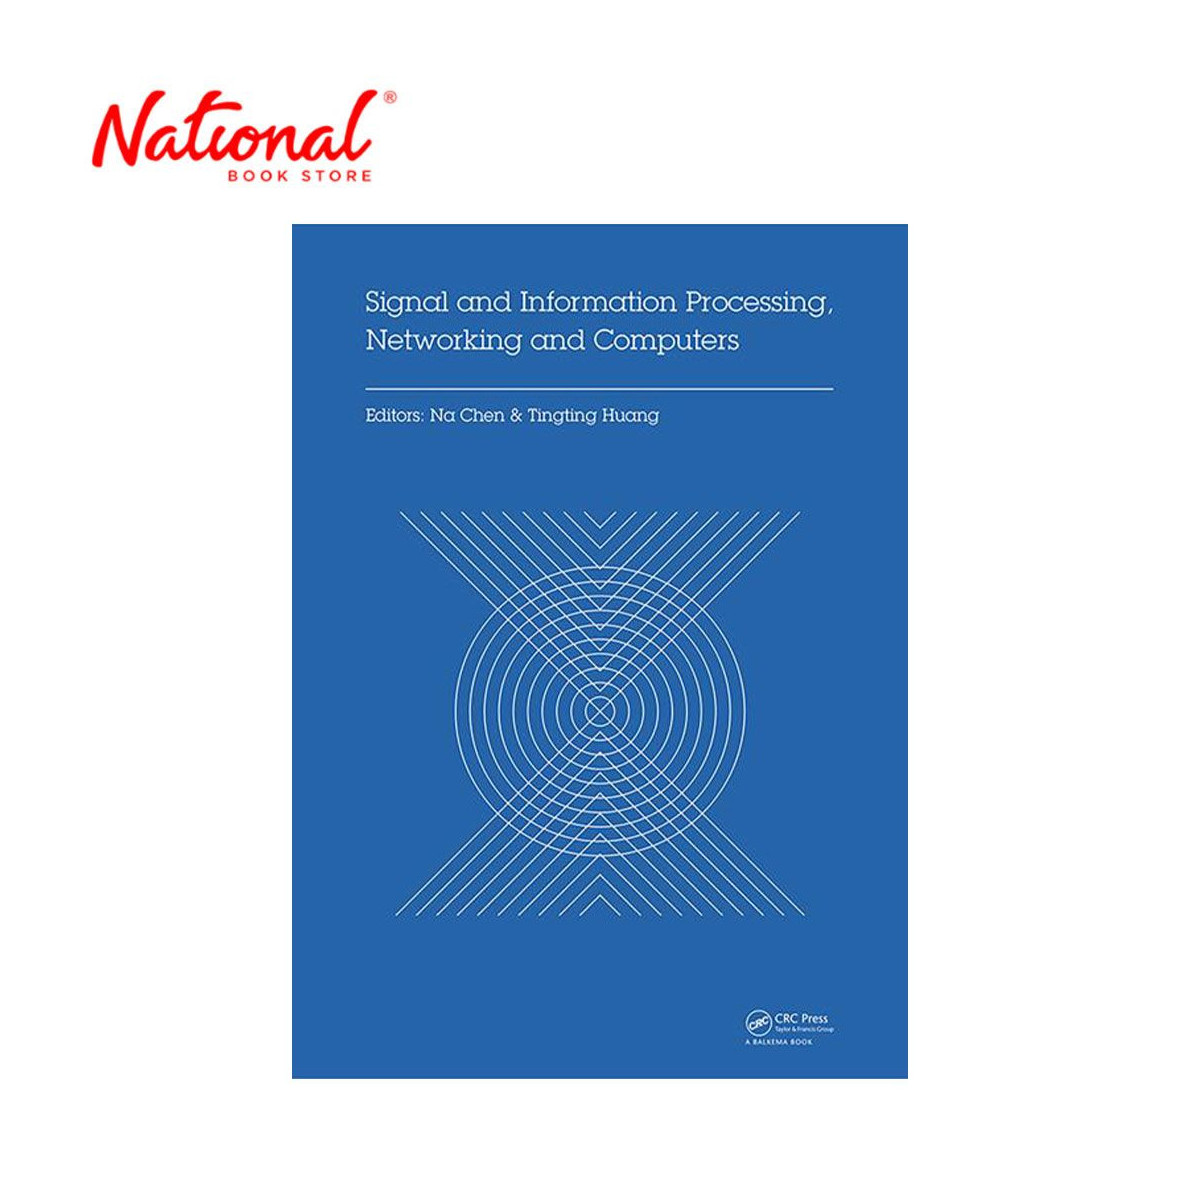 Signal and Information Processing Networking and Computers by Na Chen and Tingting Huang